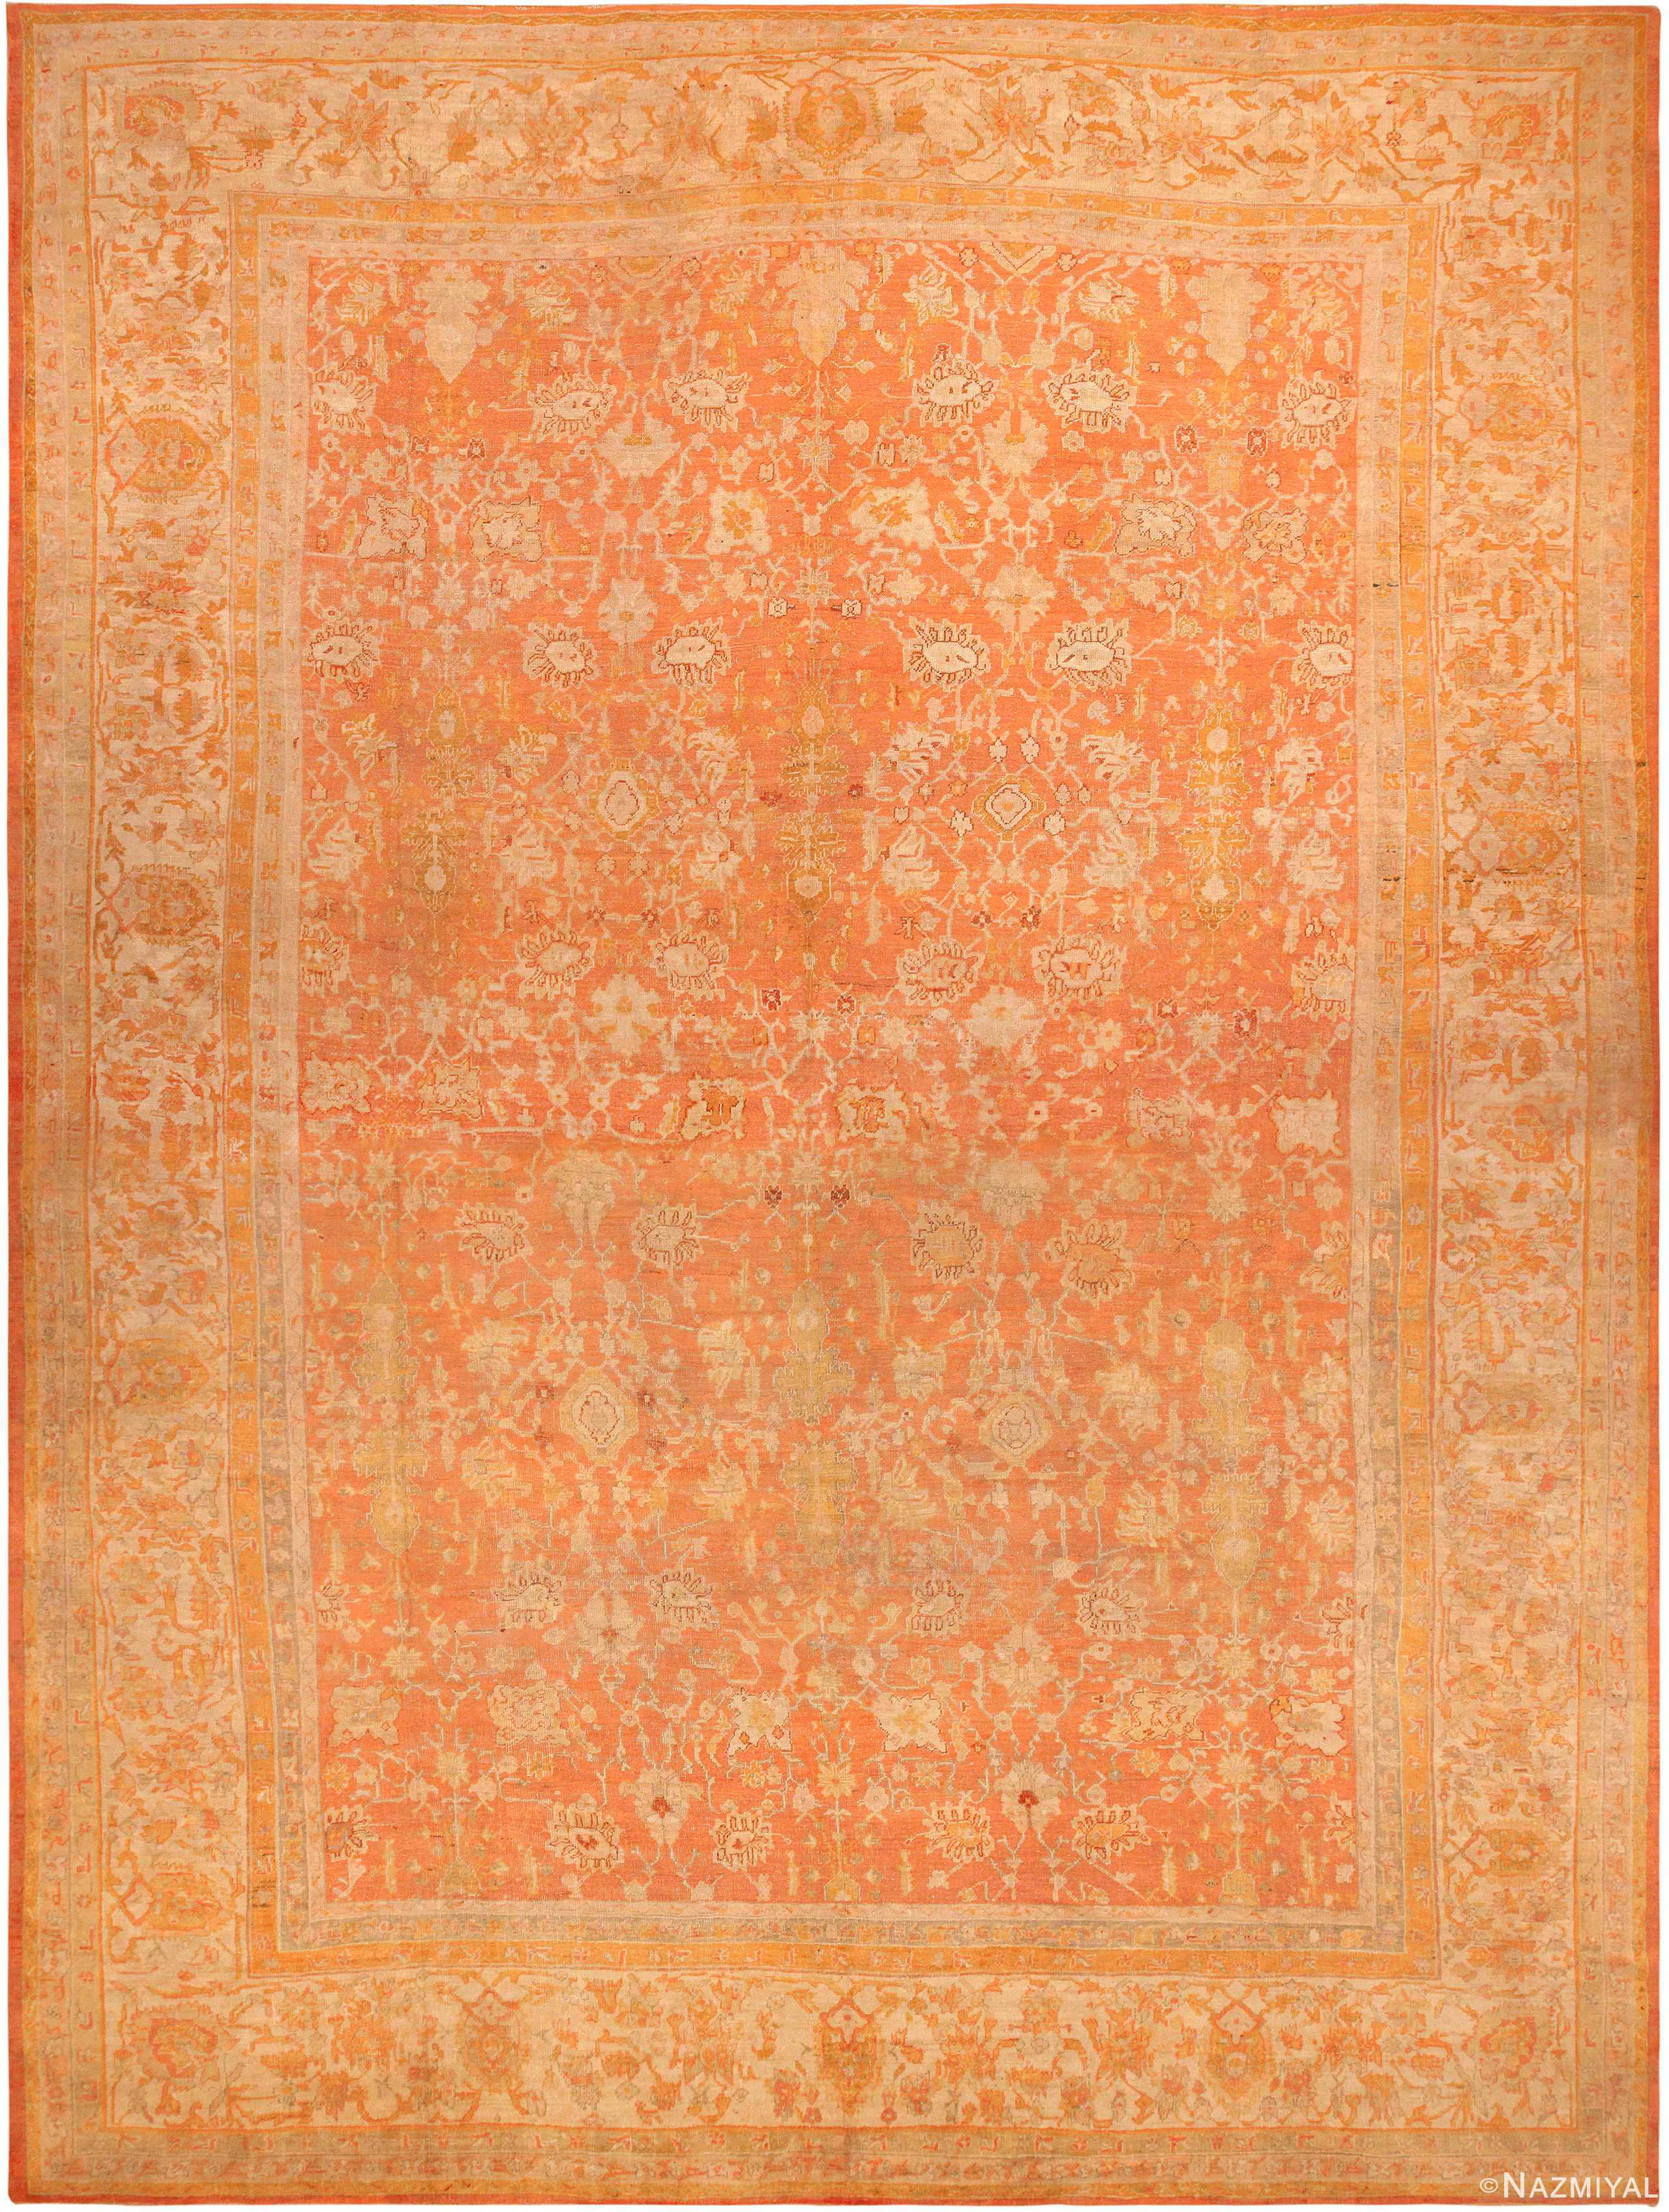 Decorative Antique Turkish Oushak Rug. 20 ft x 26 ft 6 in For Sale